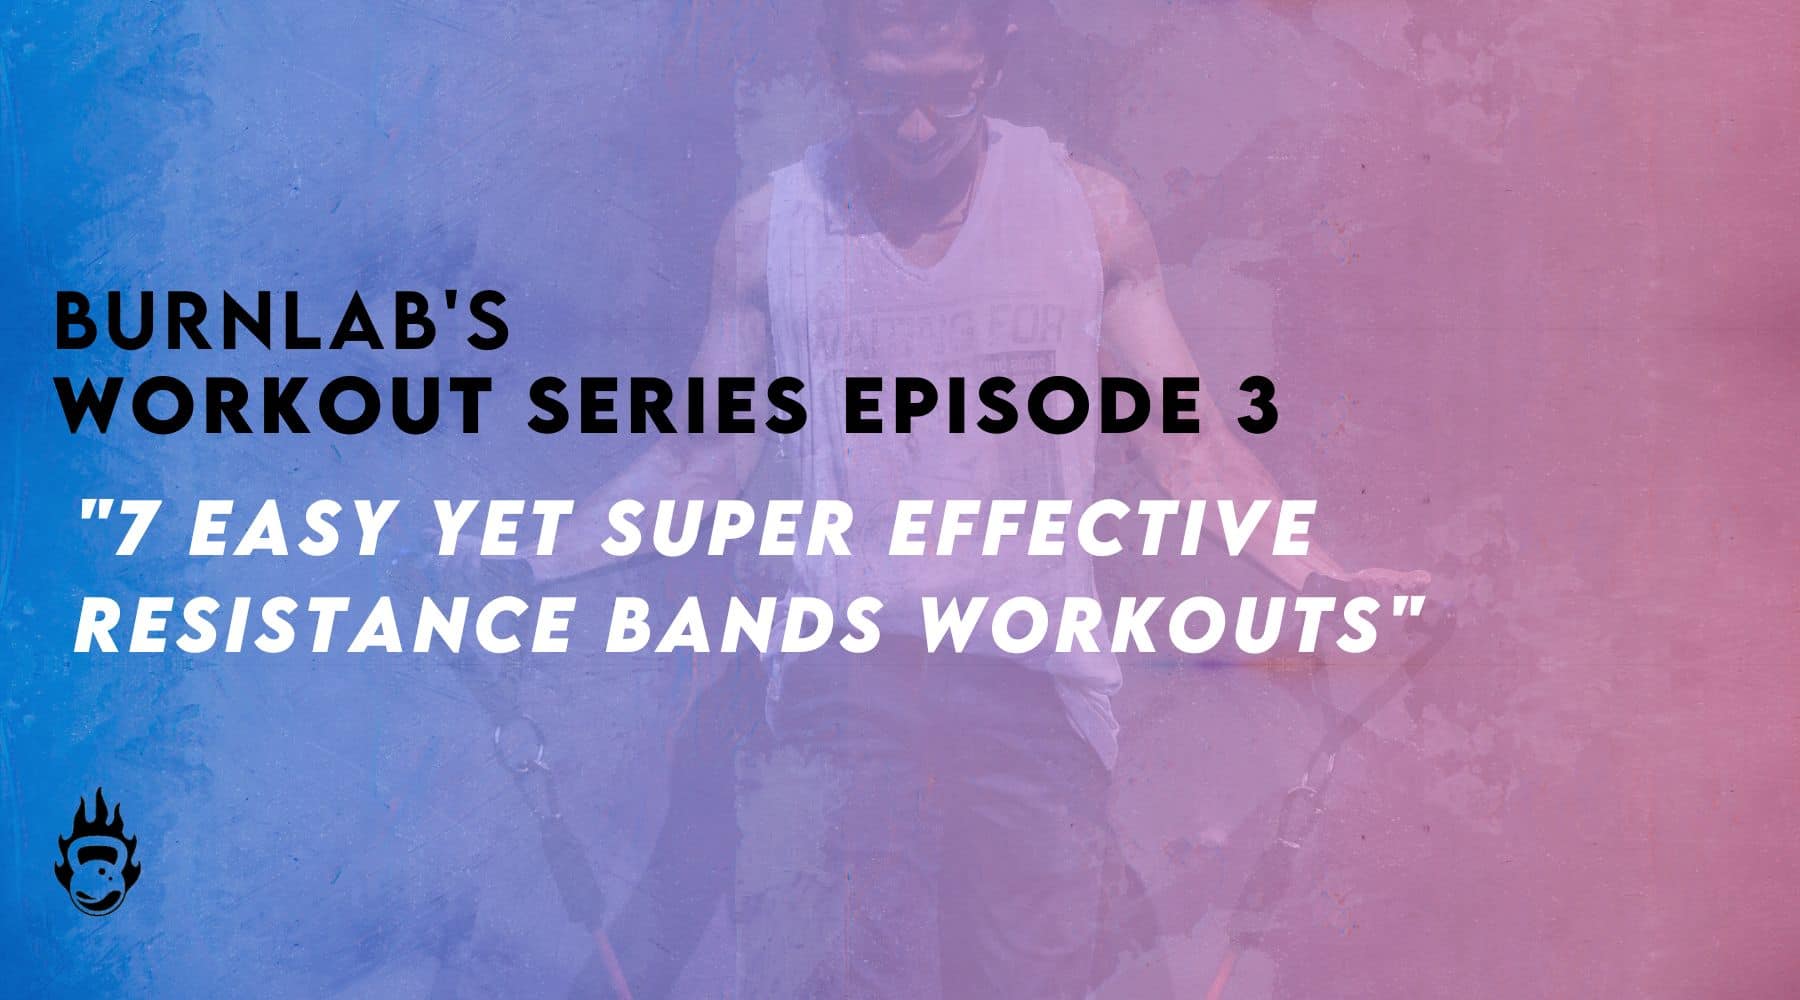 7 Easy Yet Super Effective Resistance Bands Workouts